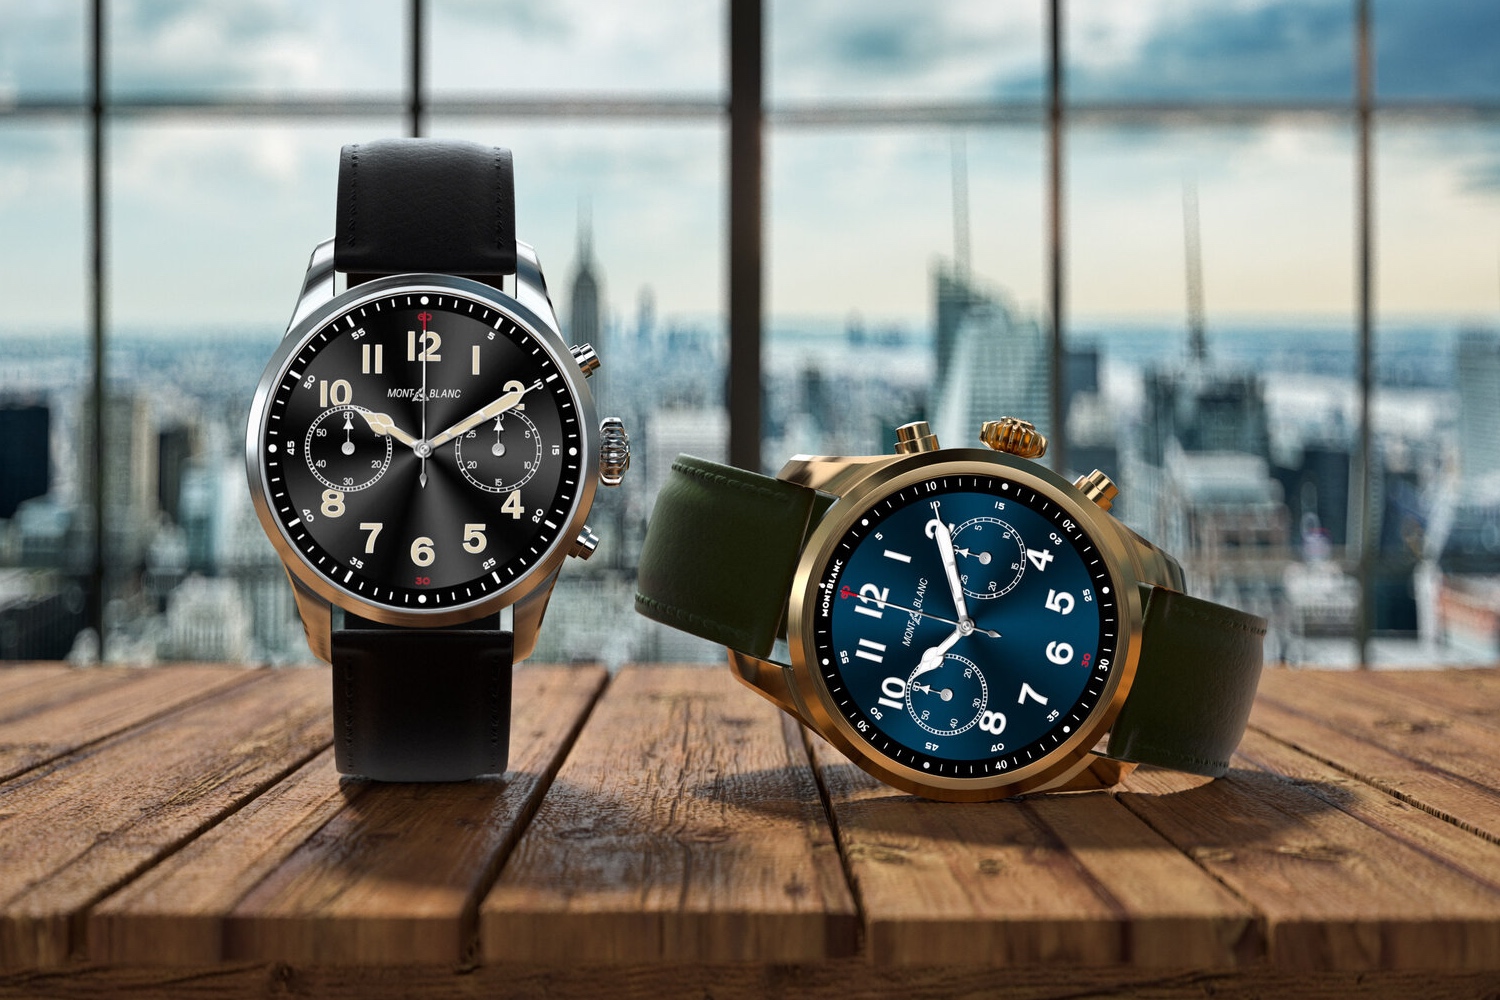 Montblanc's Summit 2 Plus is a Luxury Smartwatch with LTE | Digital Trends